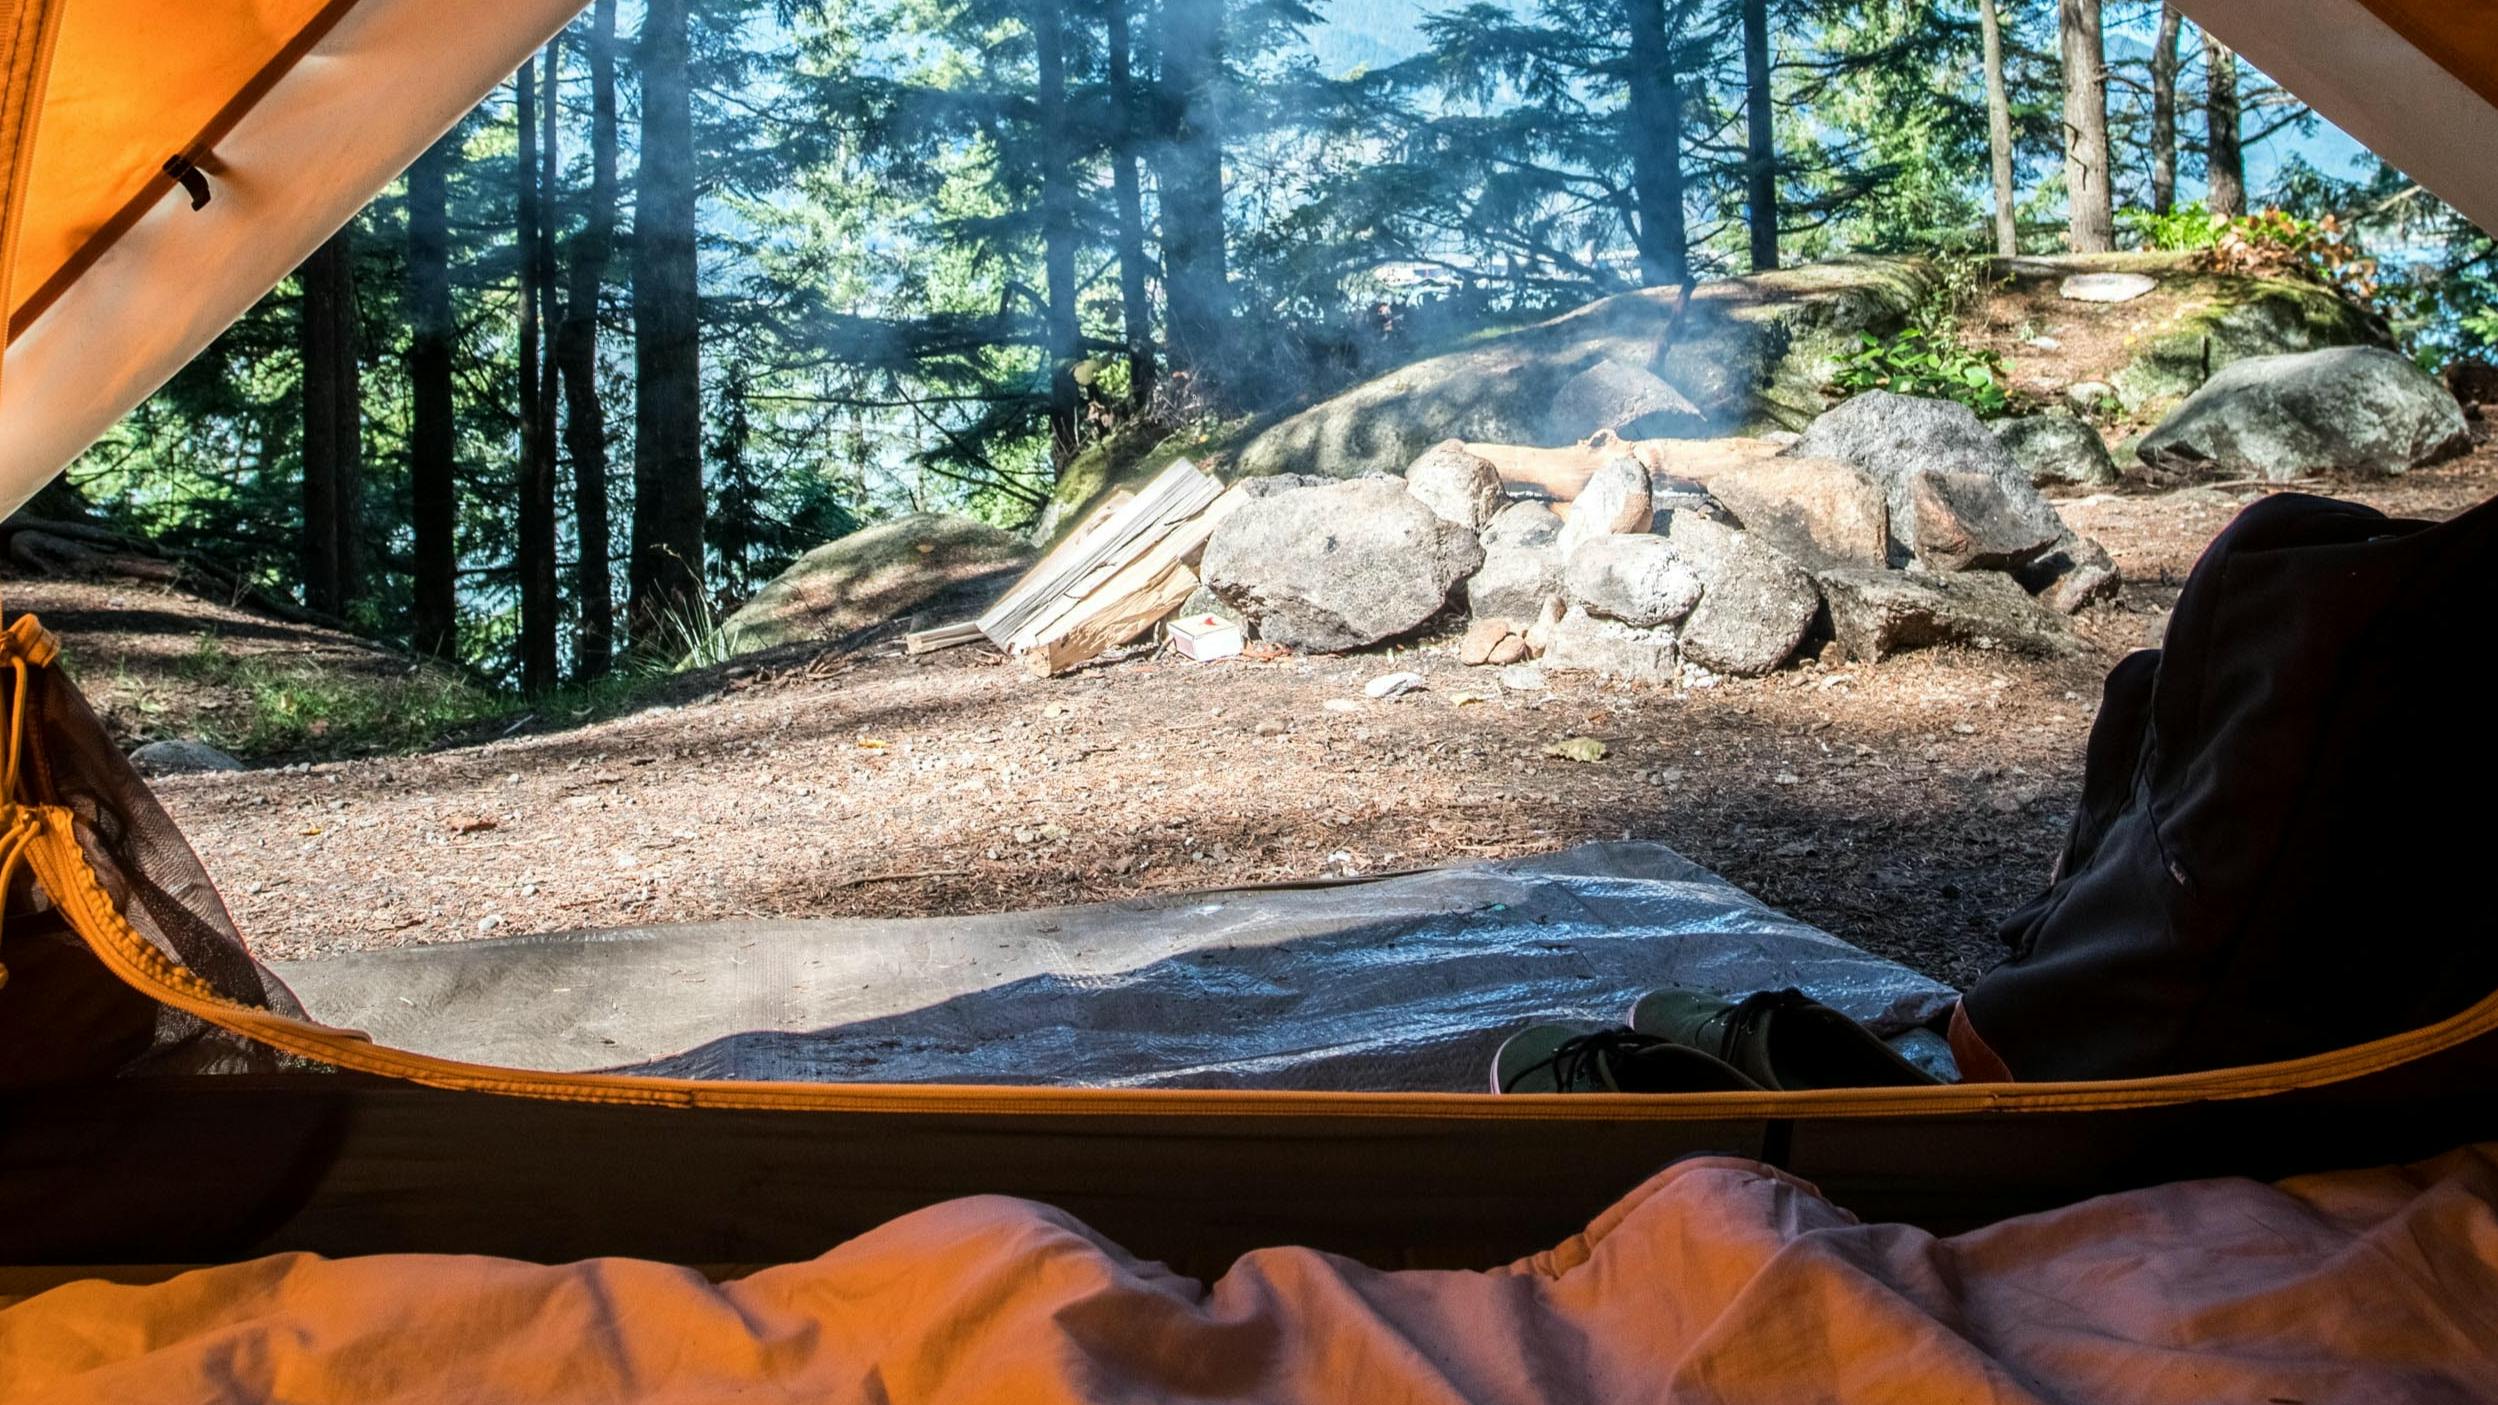 The view from inside a tent